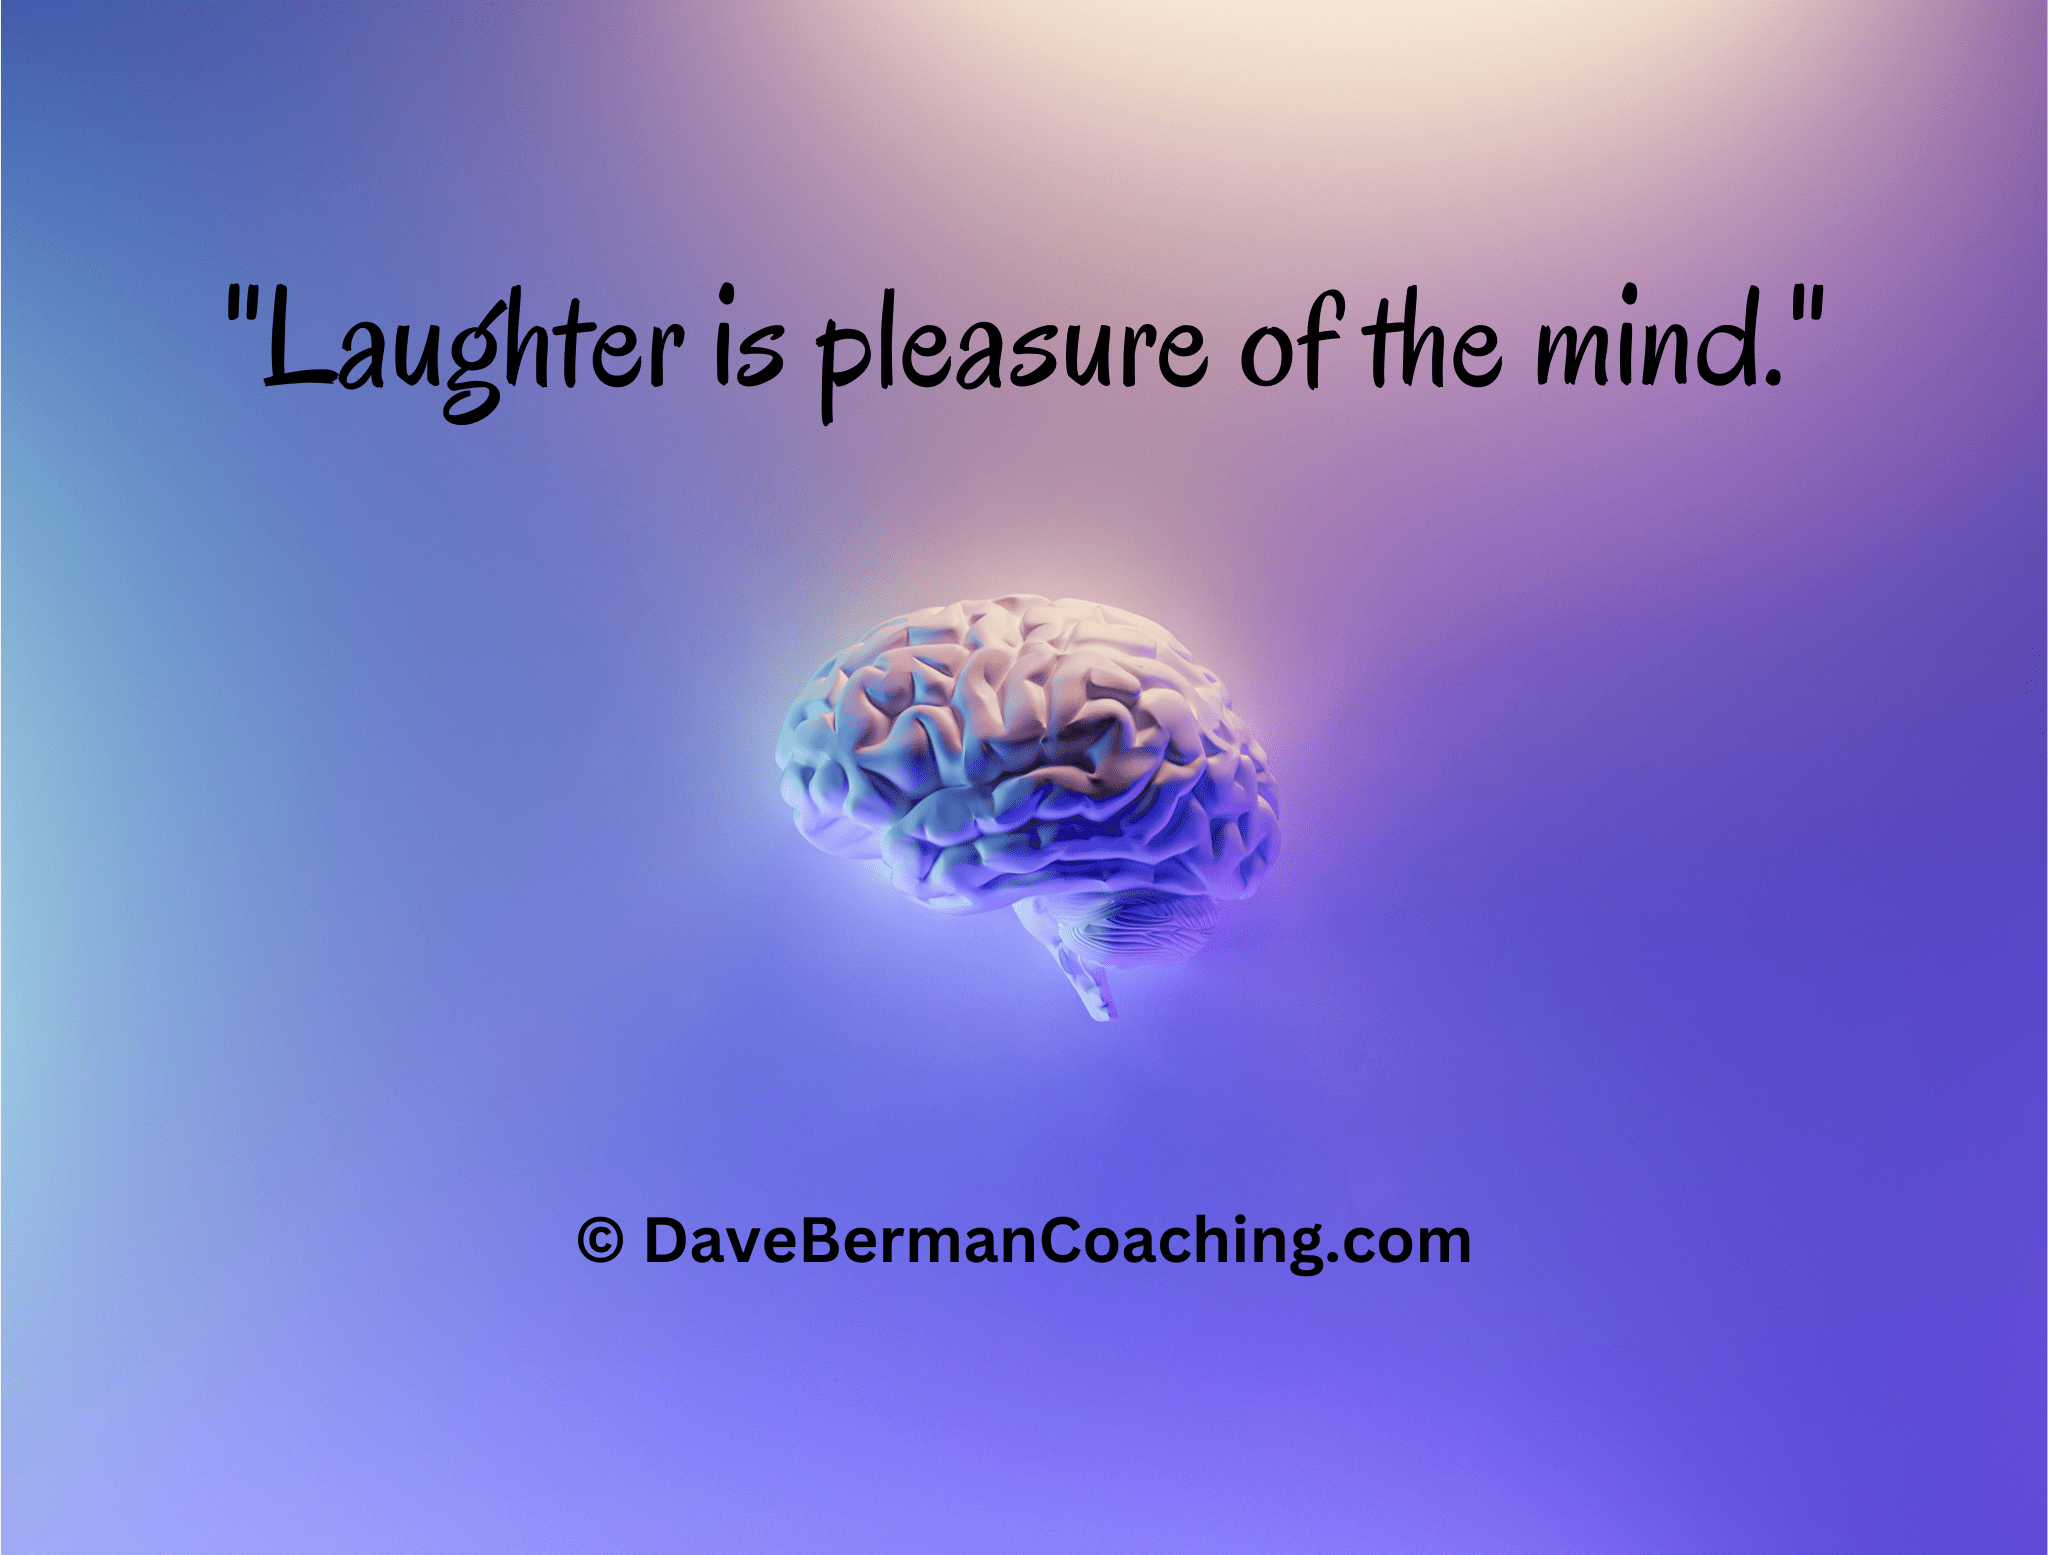 Purple background with a glowing brain in the center, beneath the quote "Laughter is pleasure of the mind." © DaveBermanCoaching.com